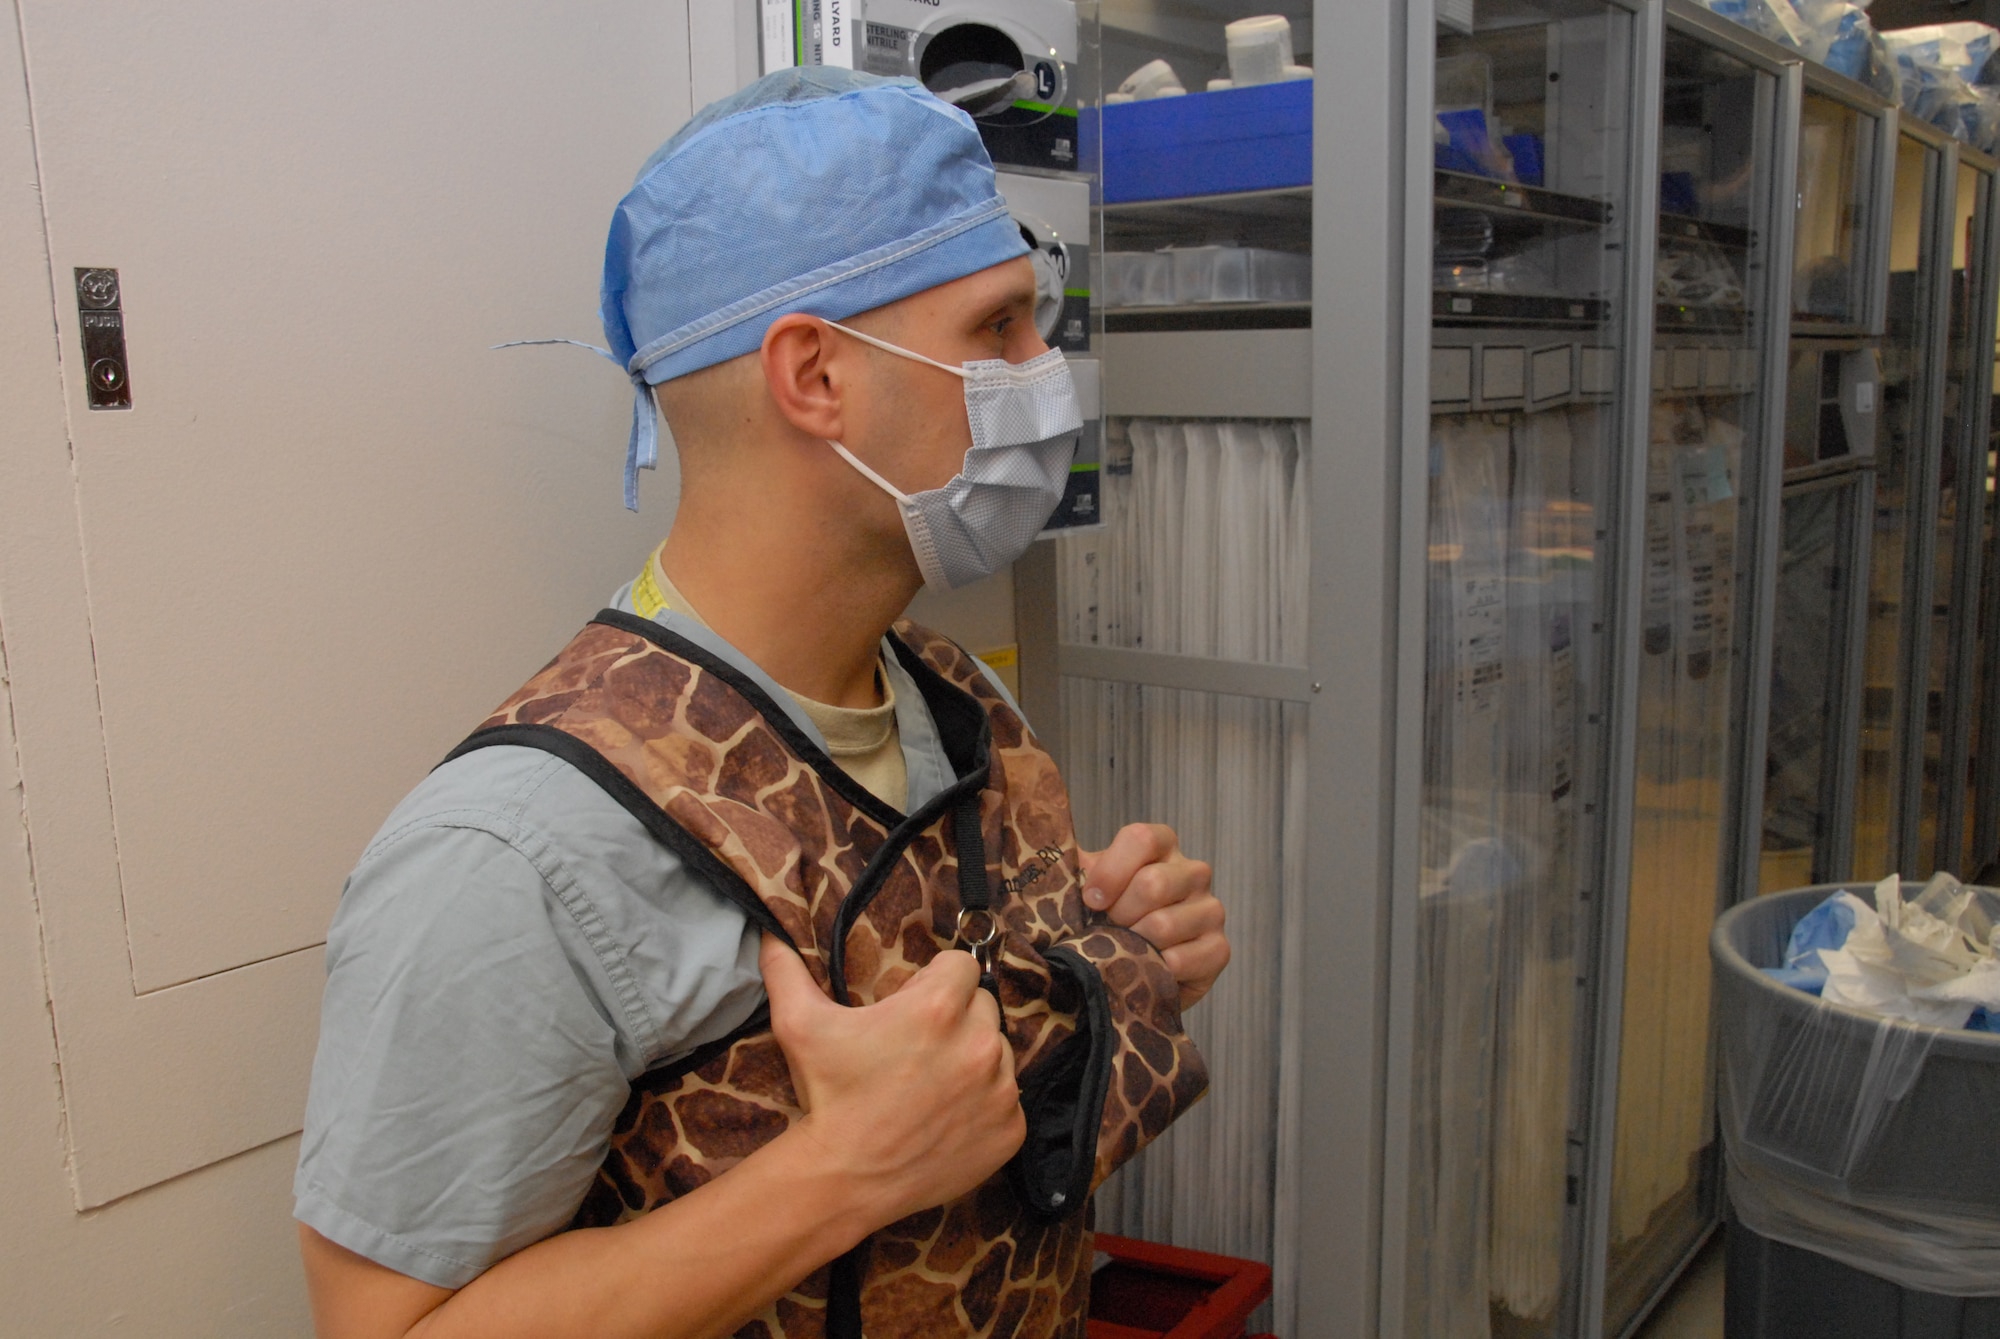 Oregon Air National Guard Staff Sgt. Gregory Snegireff, a medic with the 142nd Medical Group, observes a pacemaker procedure in the Cardio Cath Lab at Tripler Army Medical Center, in Honolulu, Hawaii, Aug. 29, 2018. Snegireff and his fellow Airmen took part in Medical Facilities Annual Training, Aug. 18-31, 2018, and were able to assist in a real-world support mission when Hurricane Lane threatened to strike the Hawaiian Islands the week of Aug. 20, 2018. (U.S. Air National Guard photo by Master Sgt. Nick Choy)